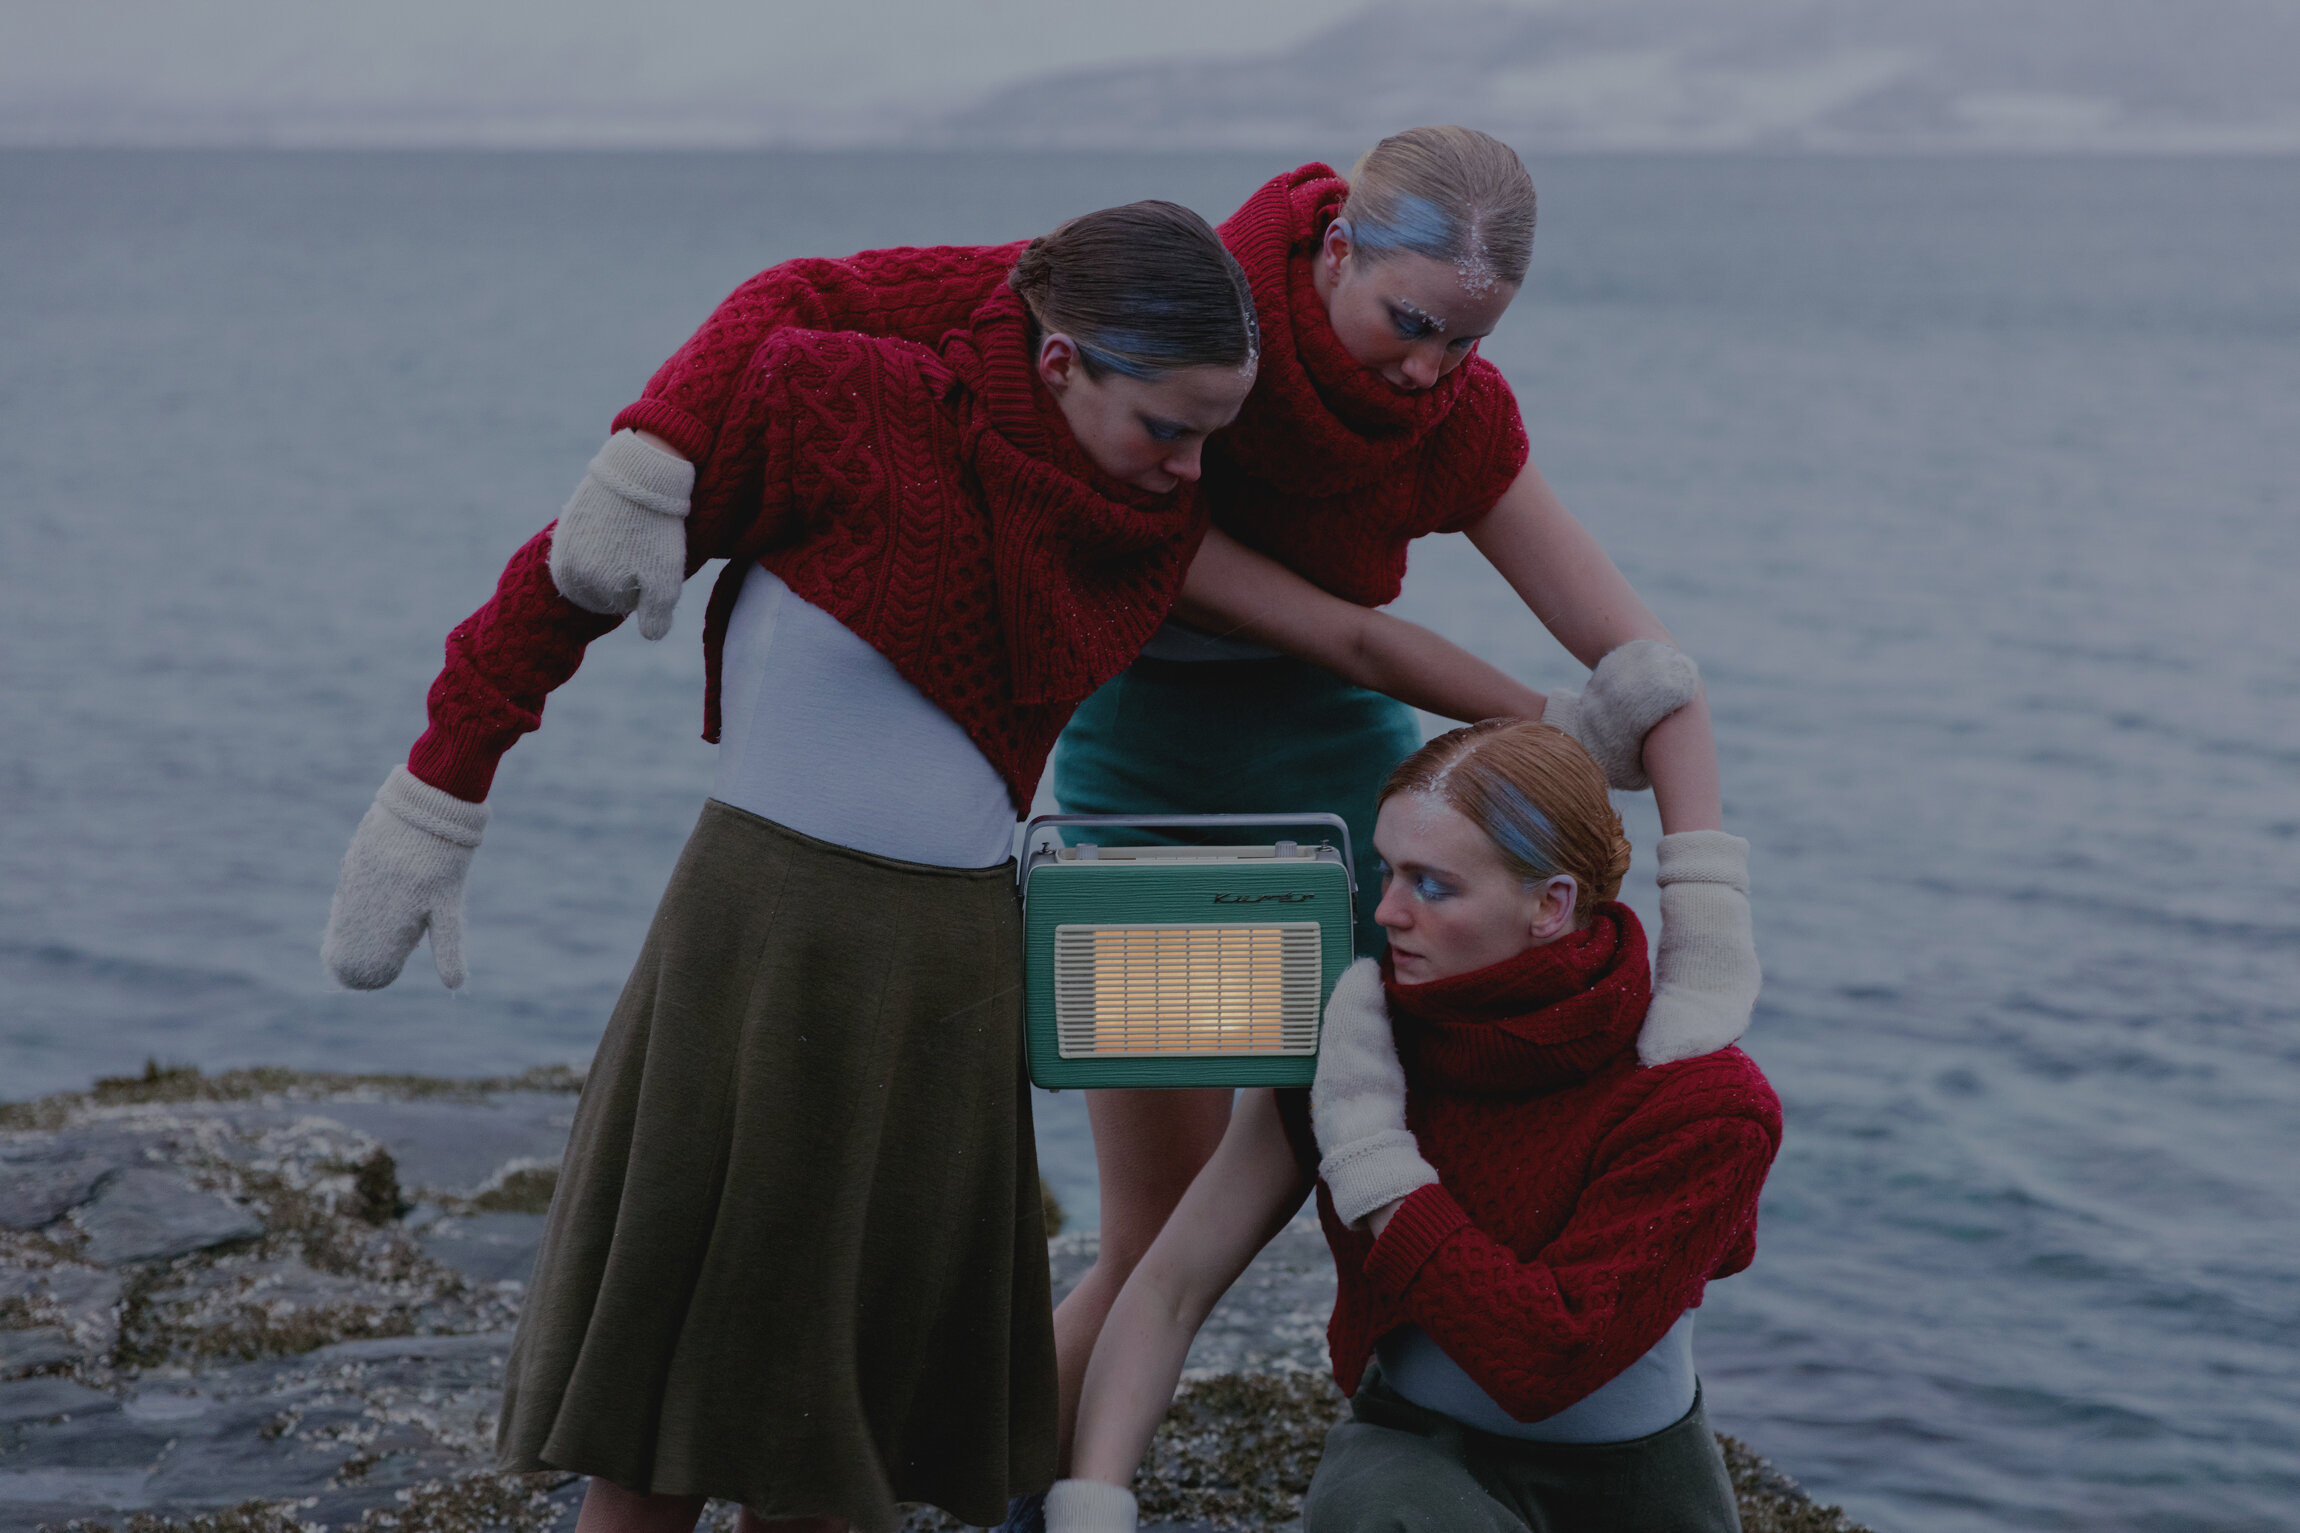  “Å klore seg fast” (Hold tight) is a dance performance based on how we live our lives in the Arctic. Premiered at Hålogaland teater in Tromsø, Norway, 23rd January 2020.  Creative team:  Simone Grøtte - Choreography and co-costume design Herman Rund